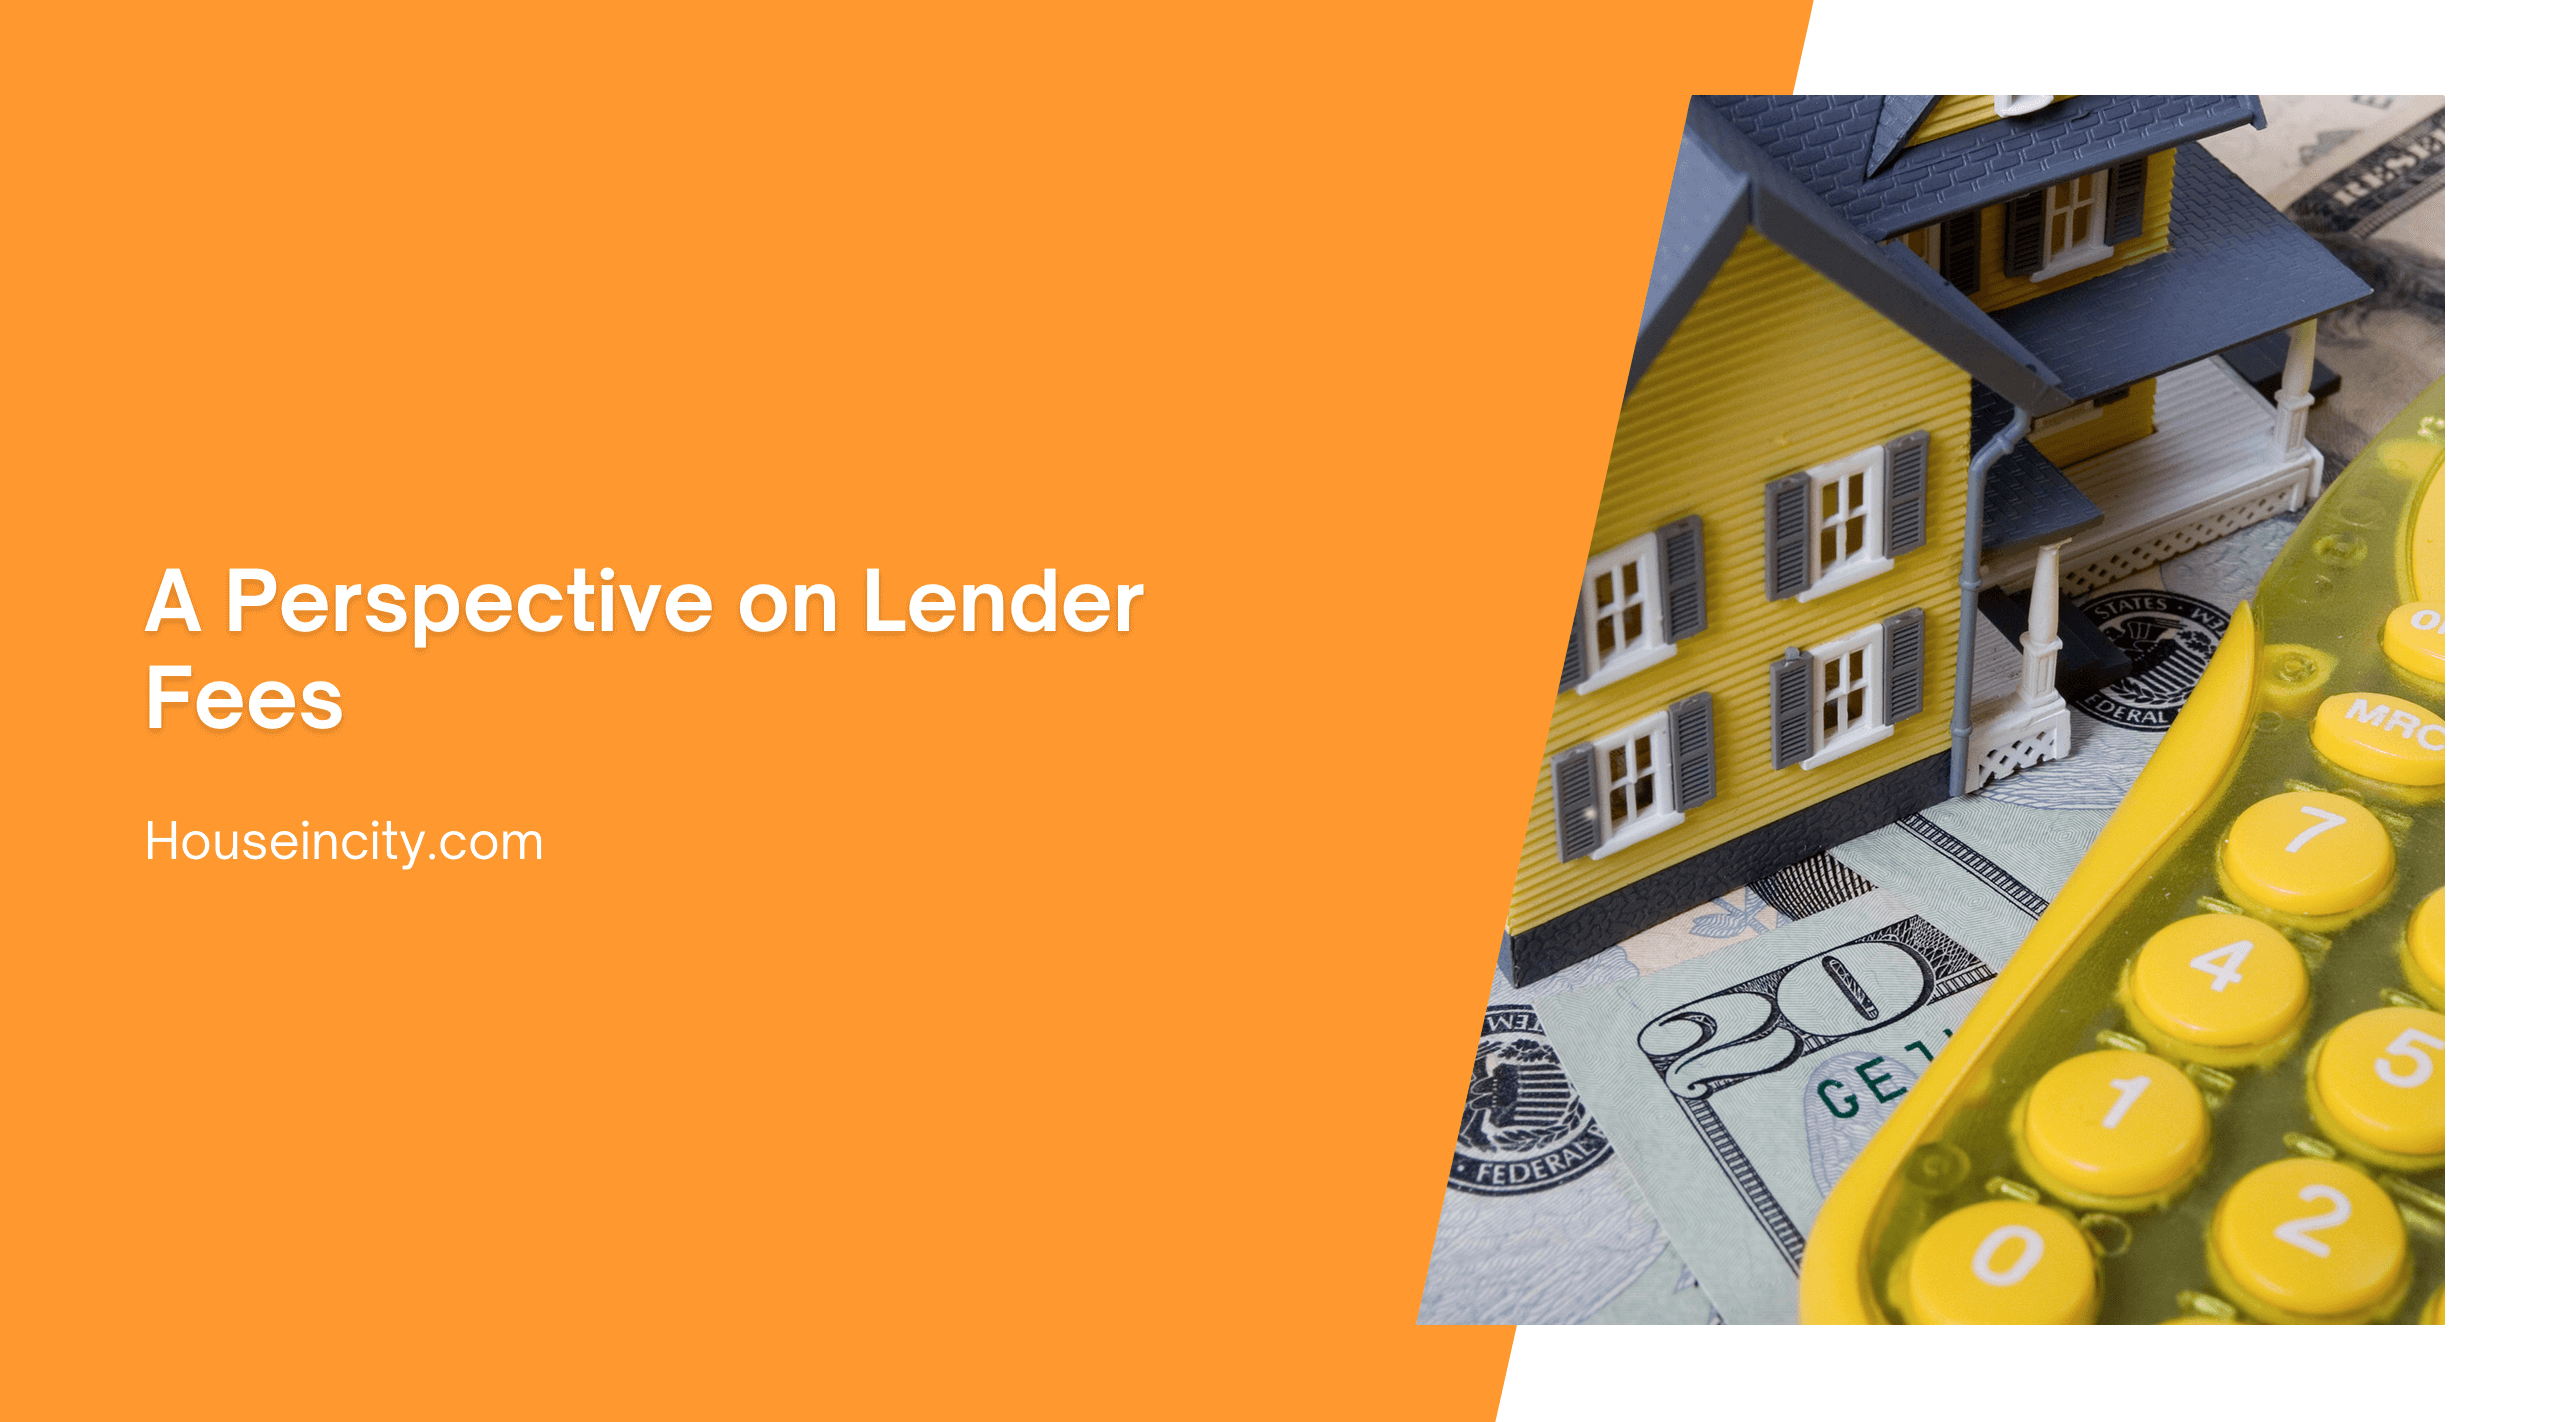 A Perspective on Lender Fees